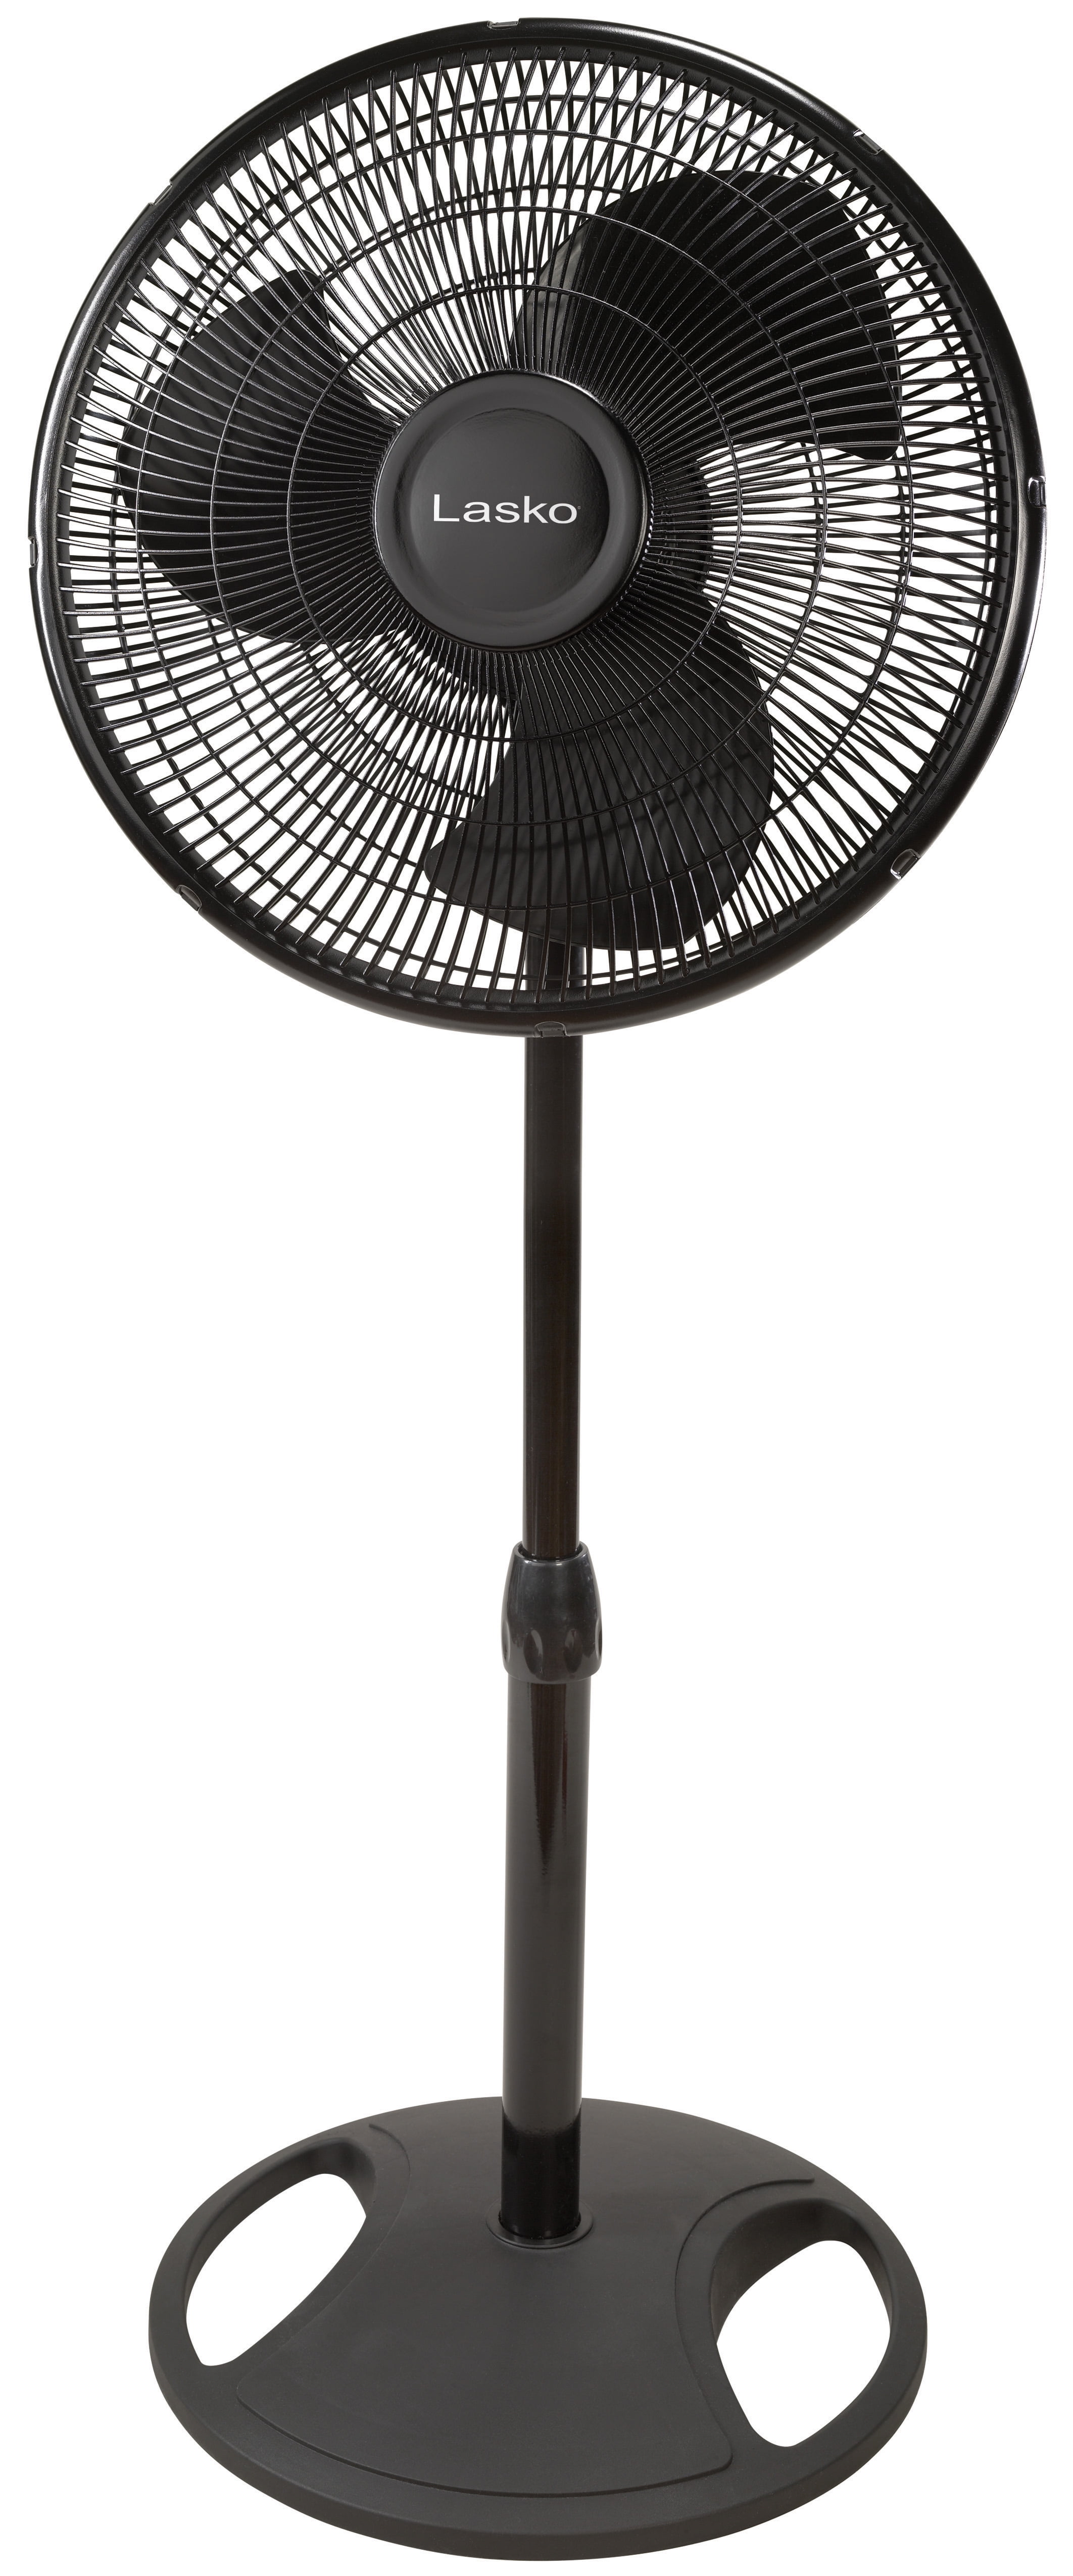 Lasko 16 Oscillating Pedestal Stand 3, What Is The Diameter Of A 42 Inch Round Table Fan